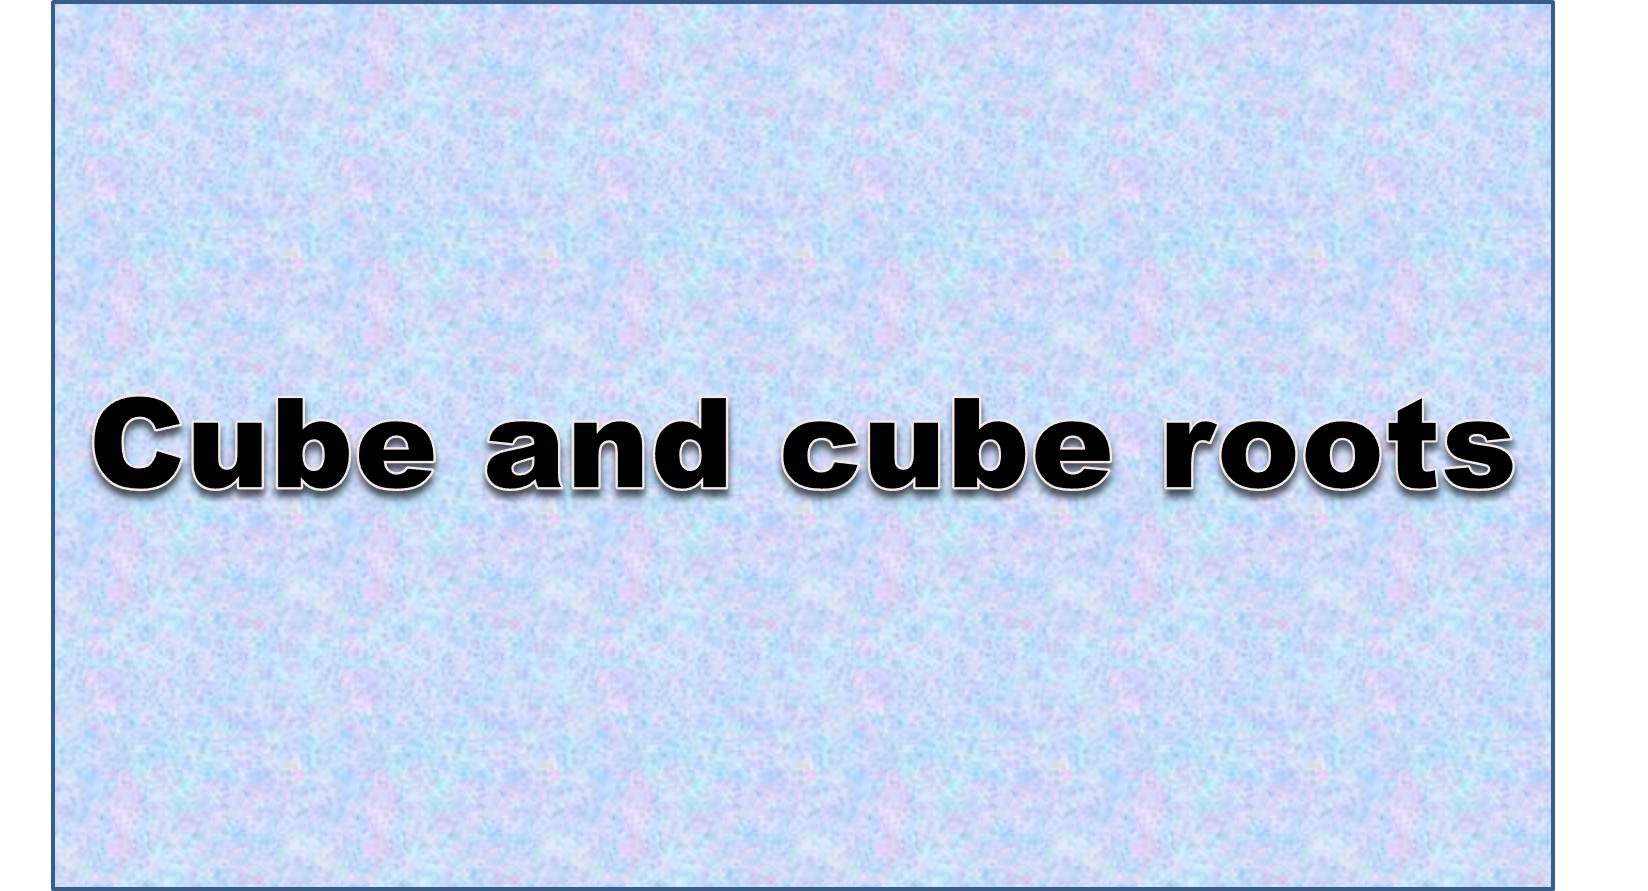 http://study.aisectonline.com/images/Cube-root of a non-perfect cube.jpg